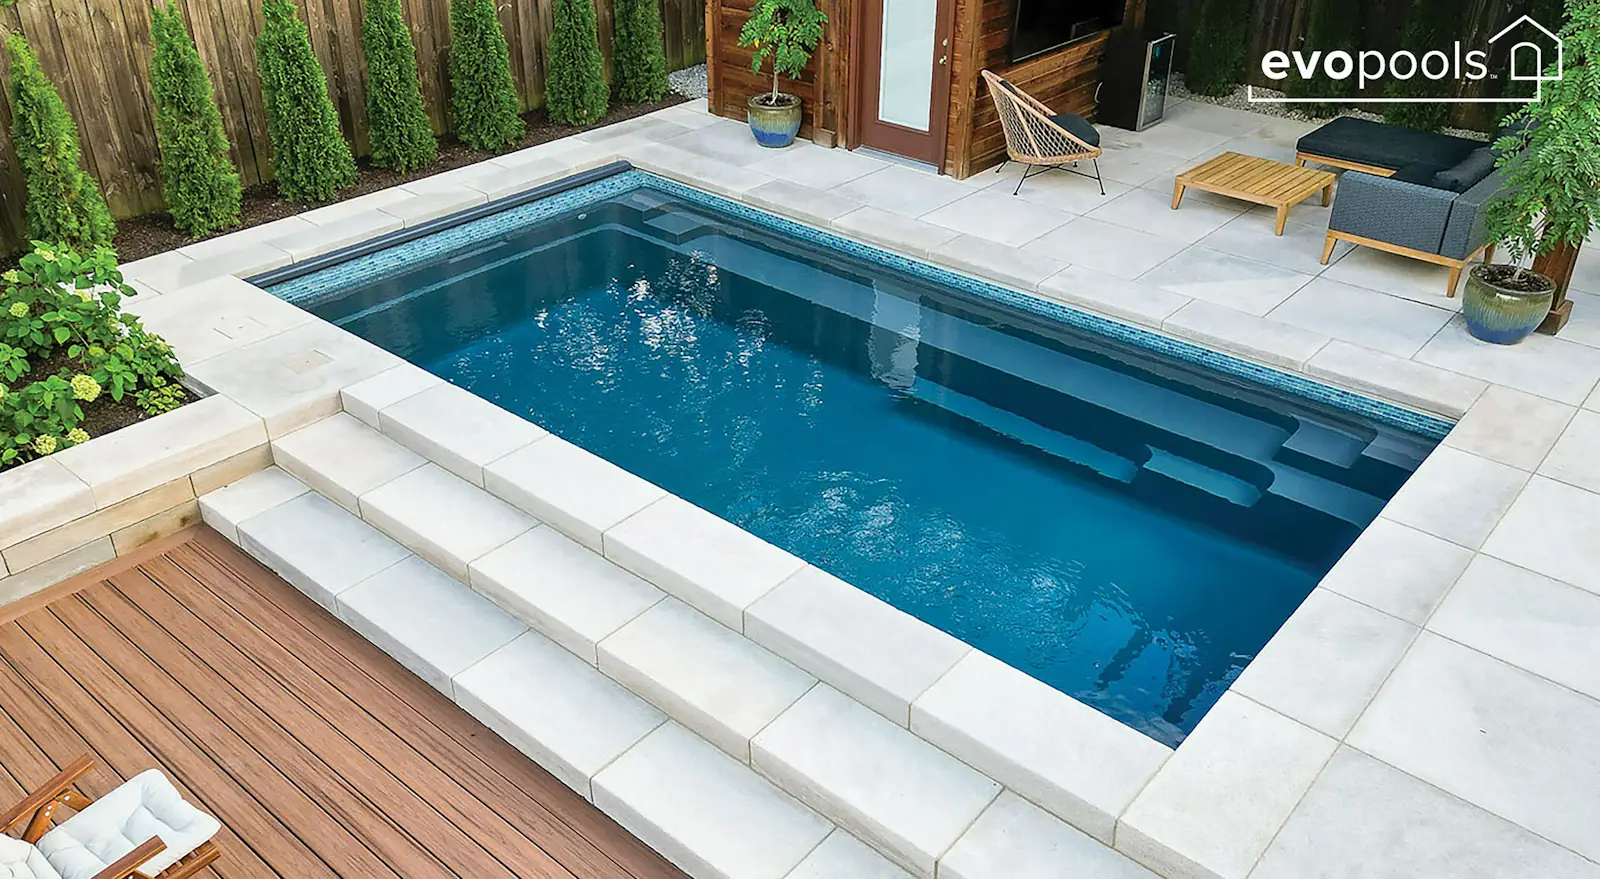 Explore Industries anncounces the launch of its new Evo Pools brand